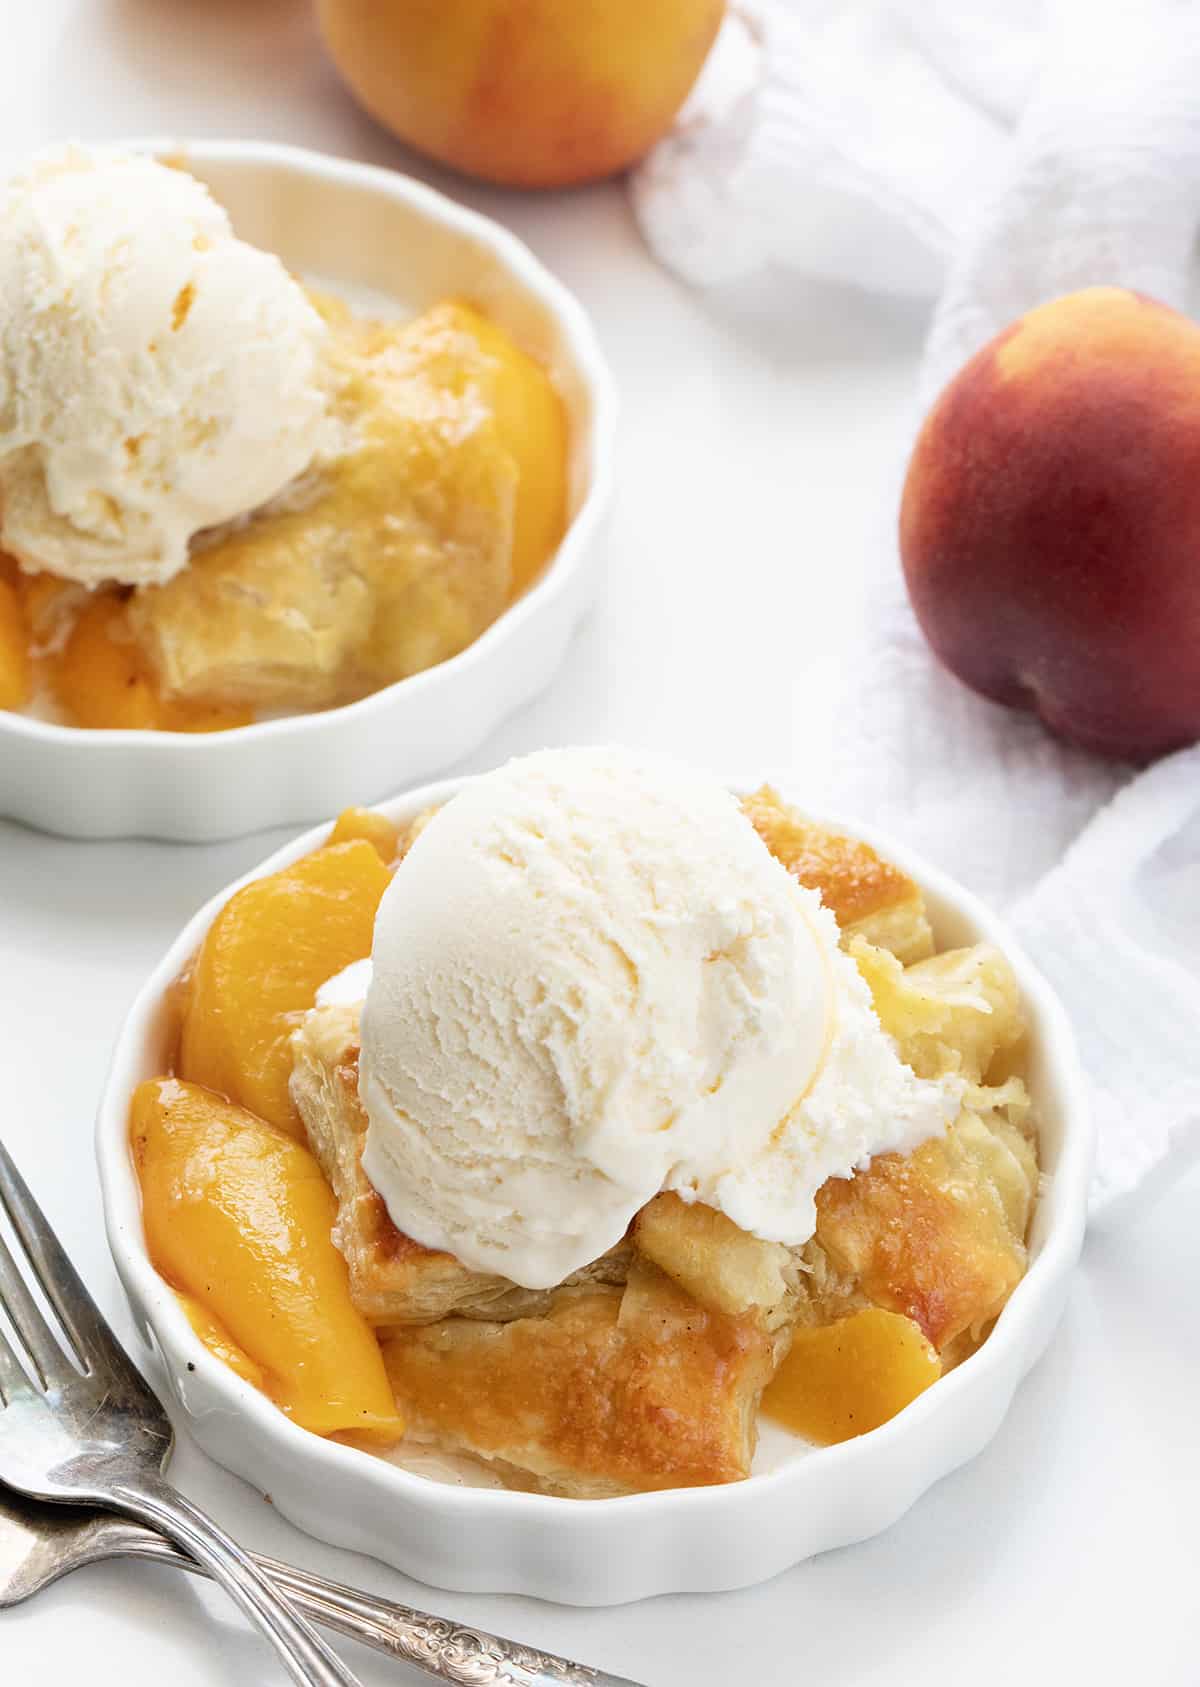 Two Bowls of Peach Puff Pastry Bake on a White Counter with a Fresh Peach and Vanilla Ice Cream Scooped on Top.